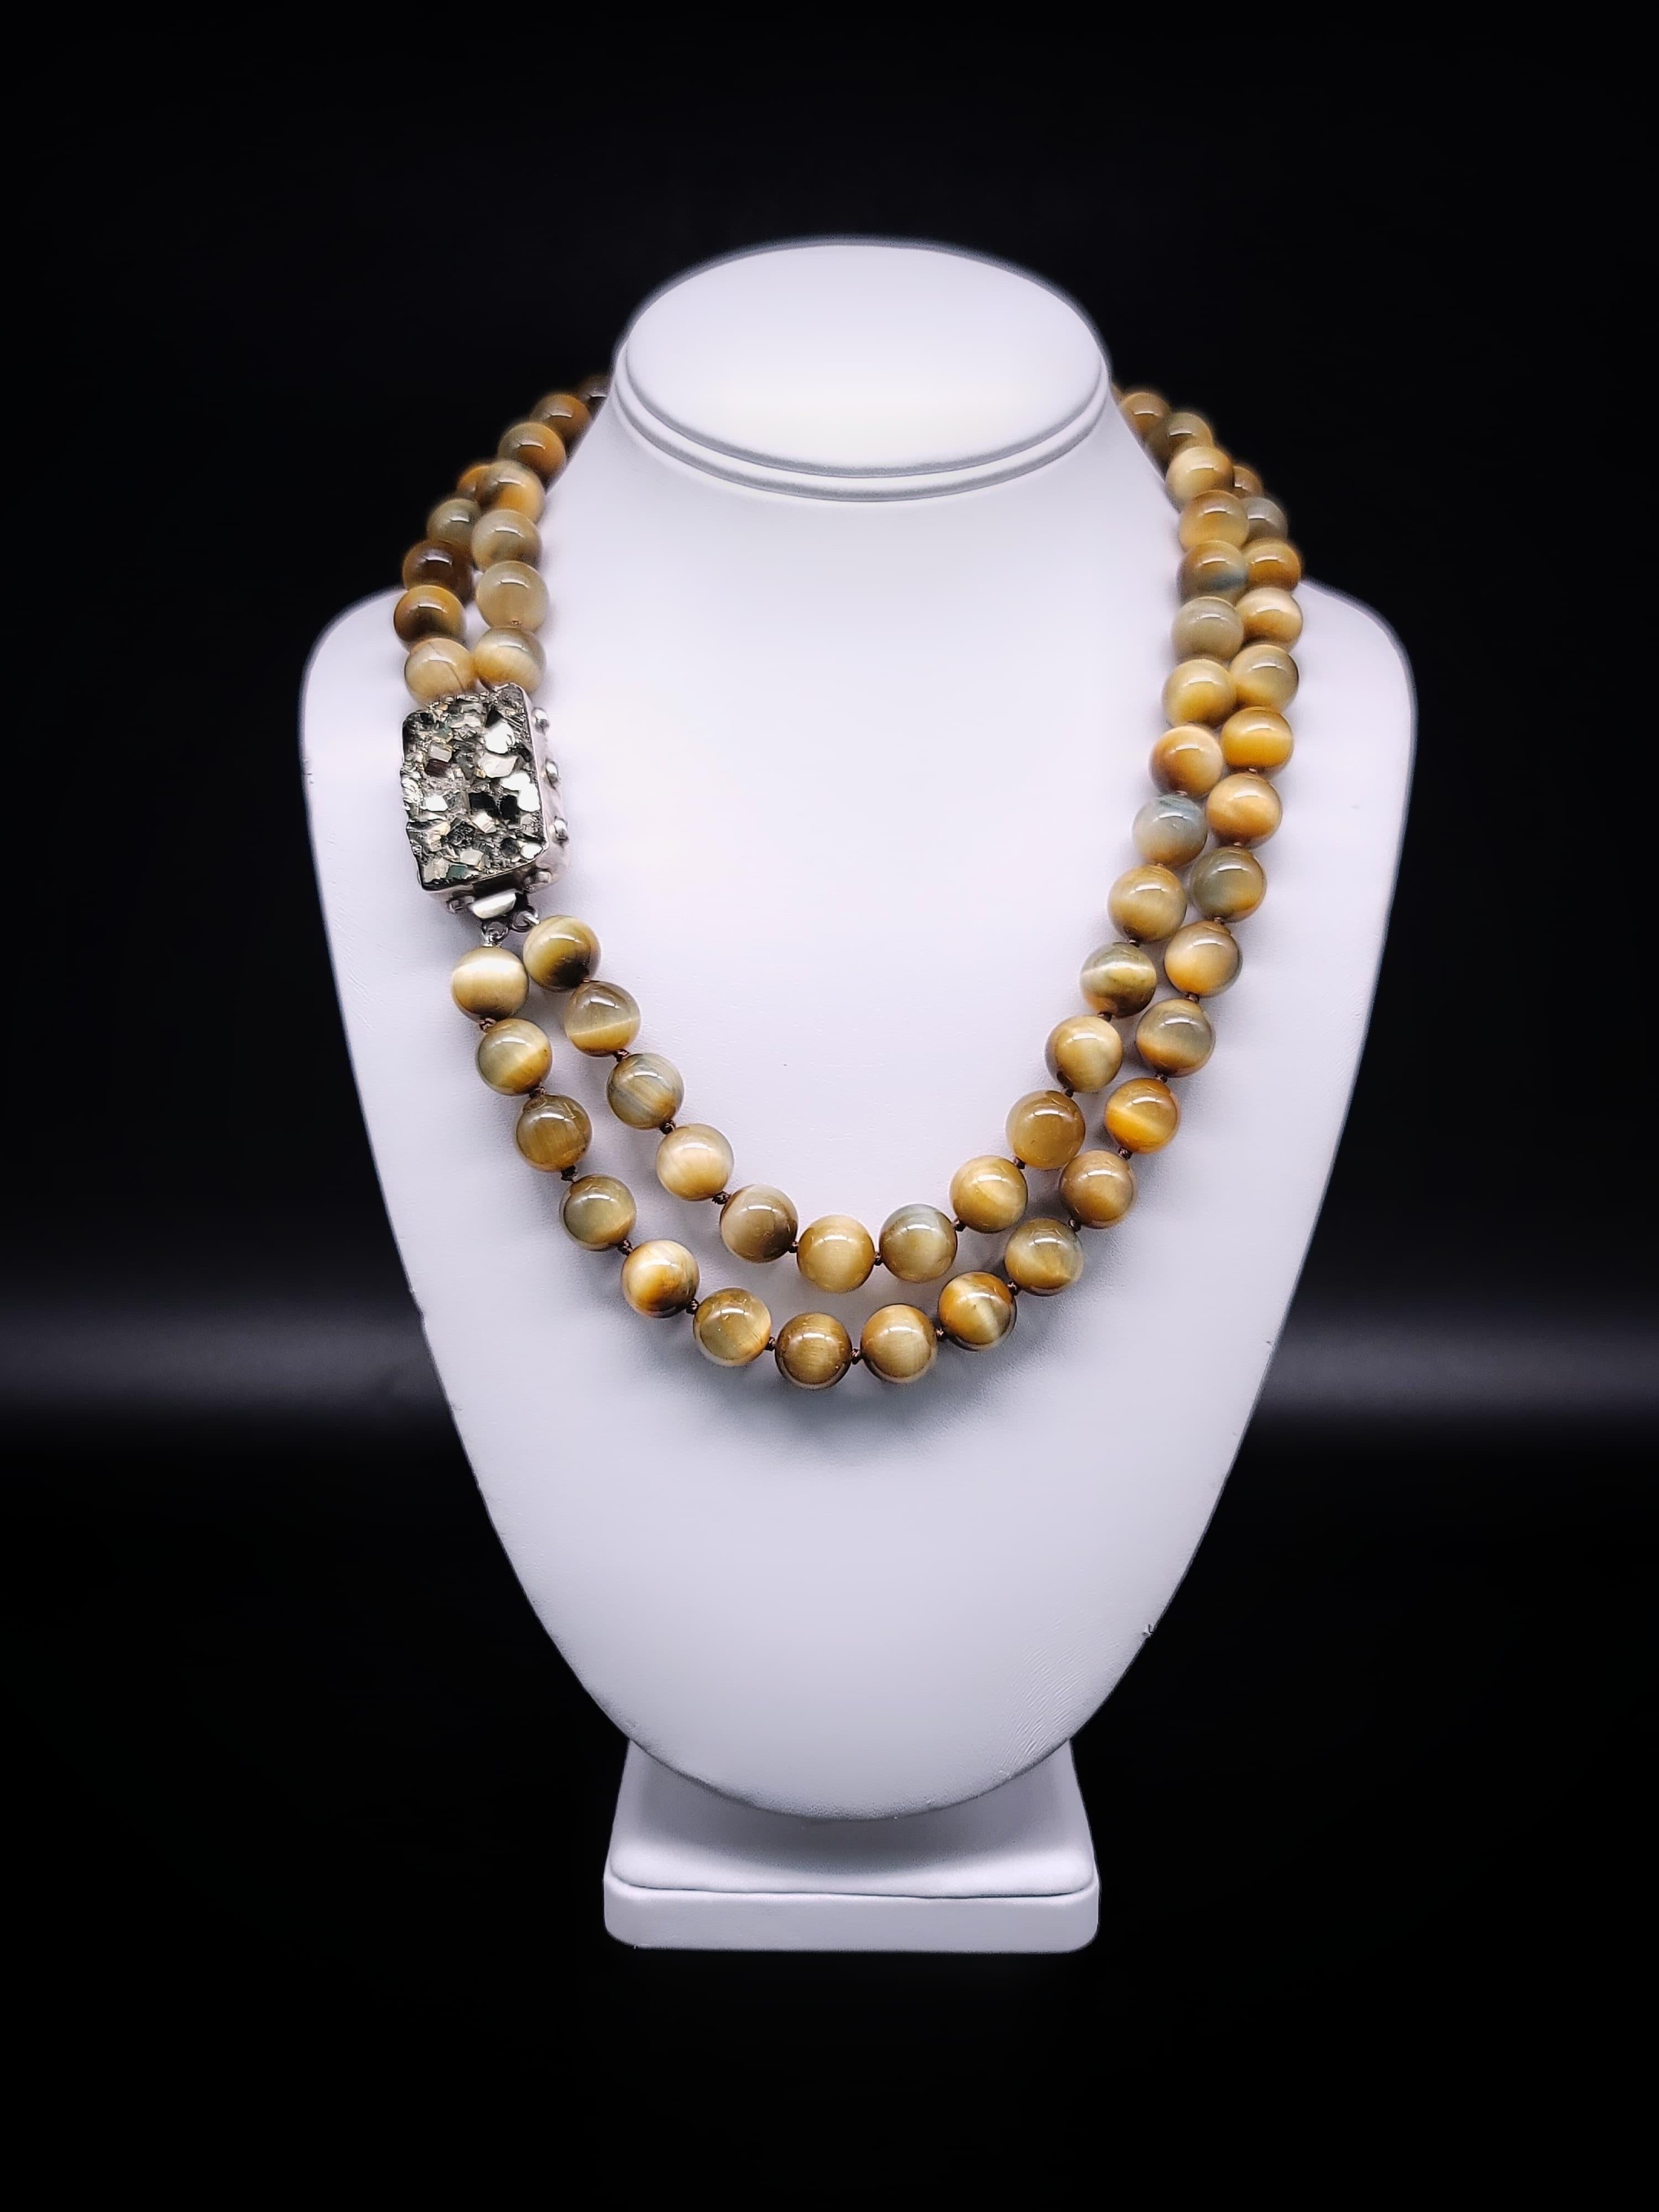 Indulge in the allure of the extraordinary with this captivating two-strand necklace featuring rare golden honey Tiger's eye beads, gracefully accented by a stunning Pyrite gemstone set in sterling silver. Pyrite, often dubbed 